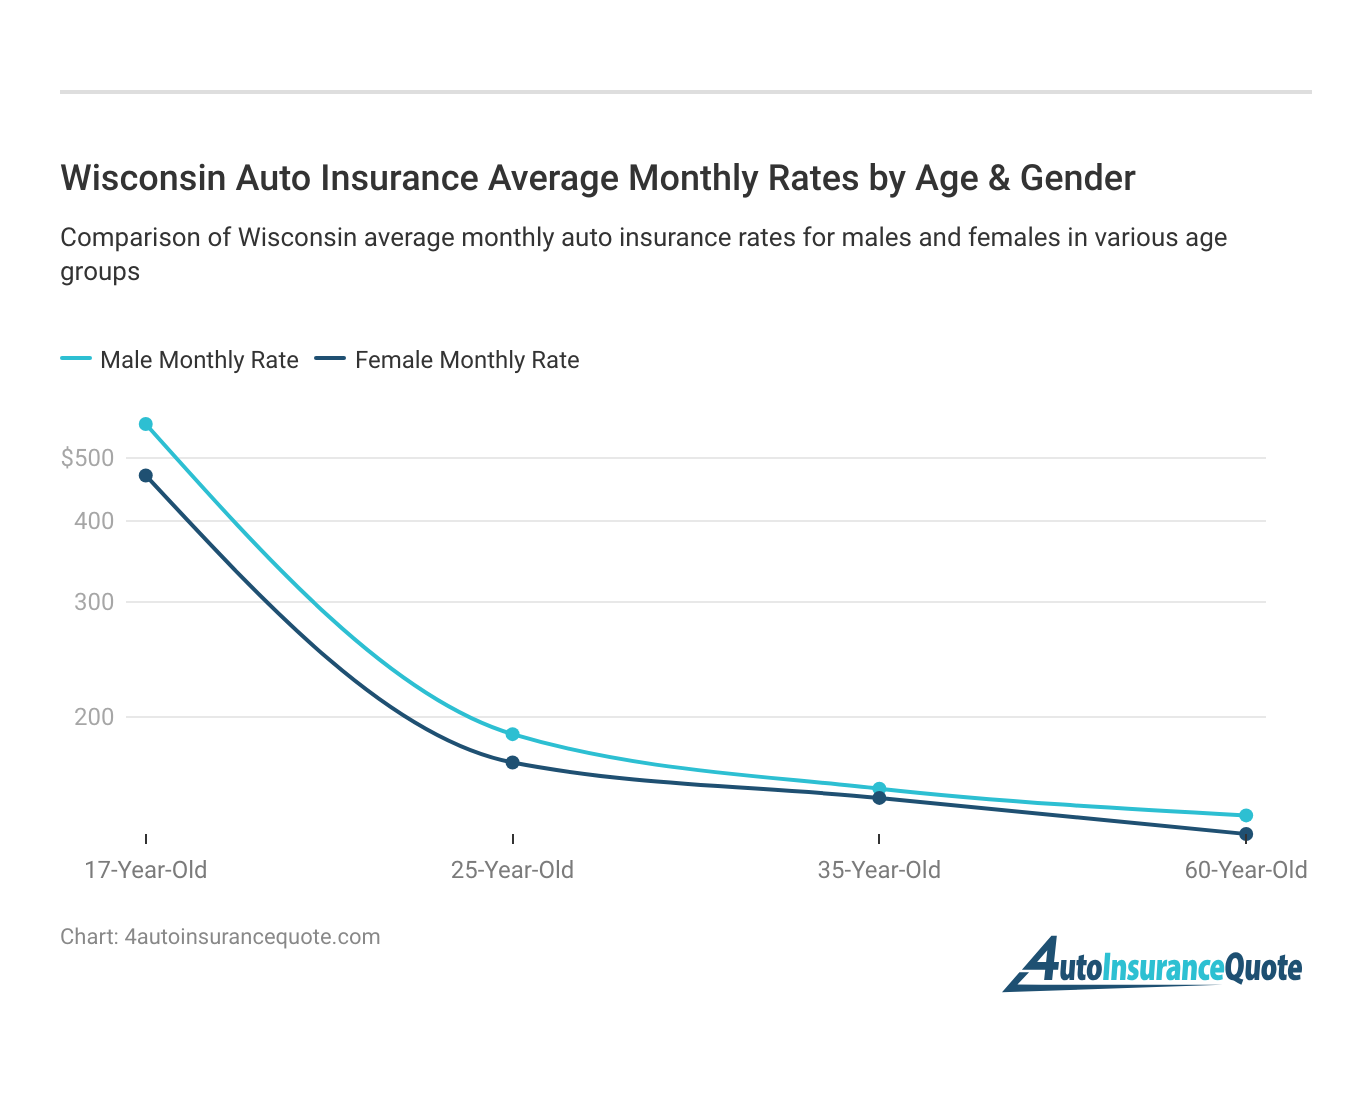 <h3>Wisconsin Auto Insurance Average Monthly Rates by Age & Gender</h3>